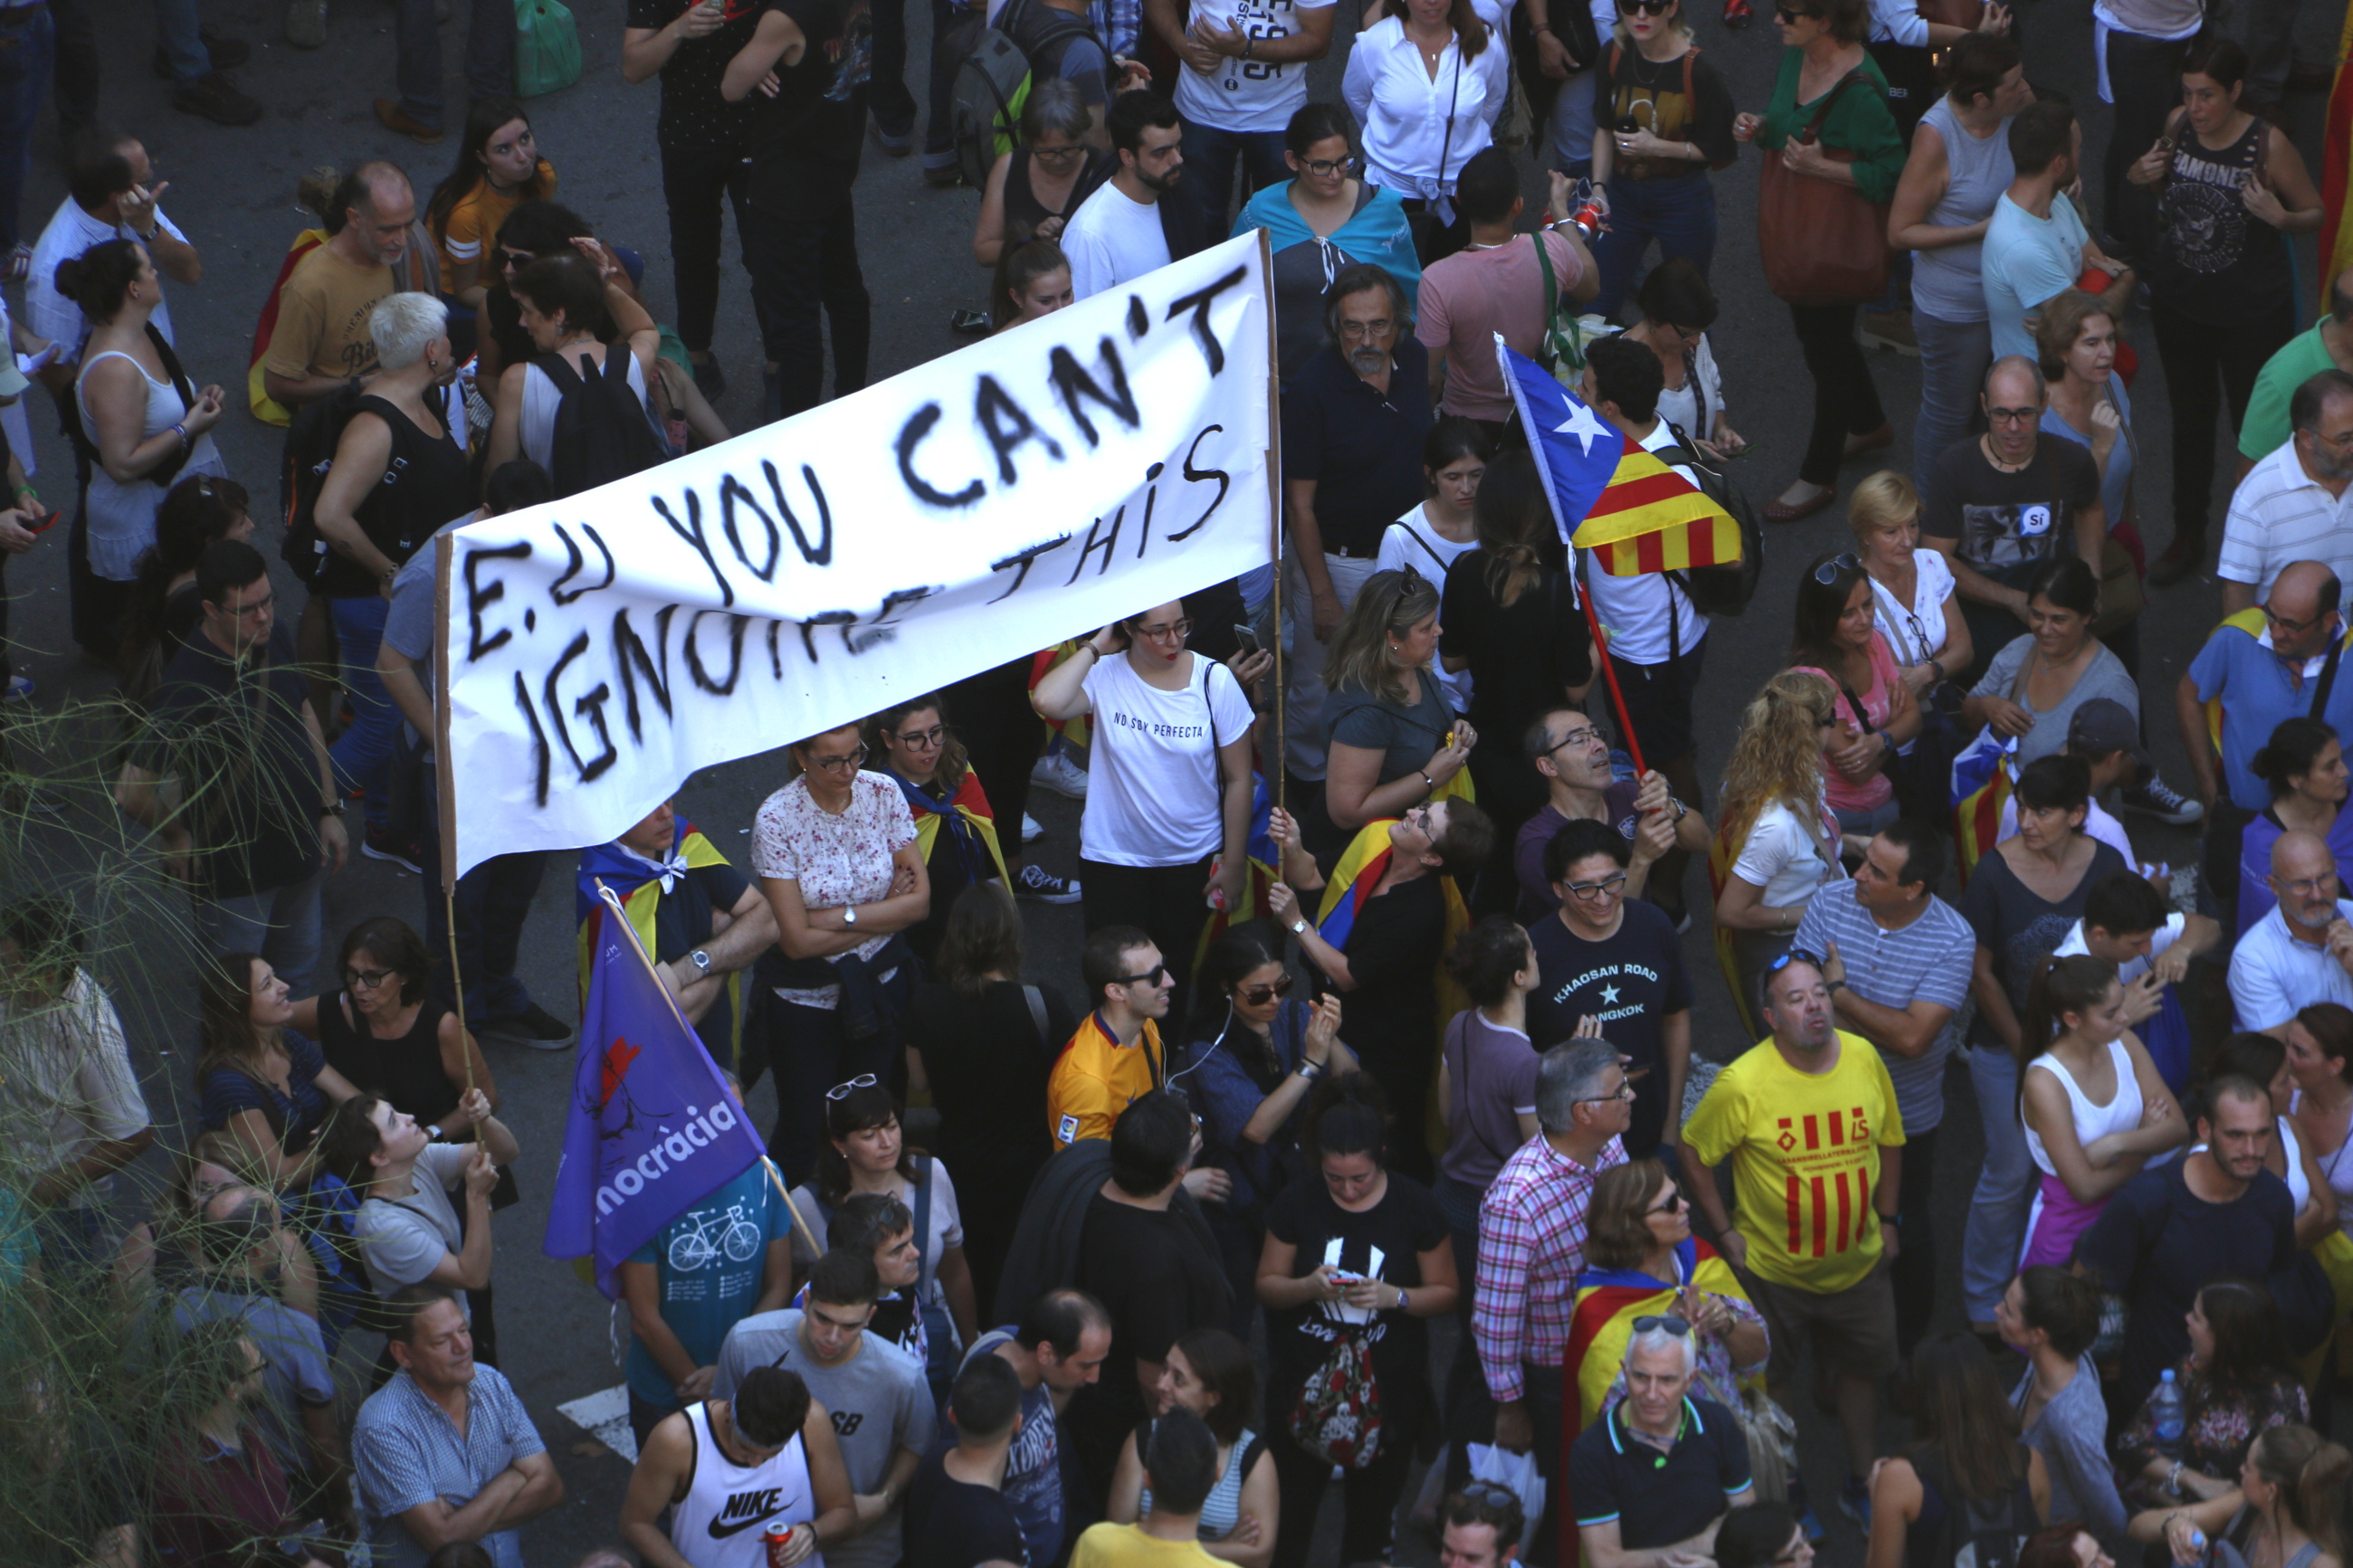 People holding up banner saying “EU you can't ignore this“ at protest on Oct 3 (by ACN)